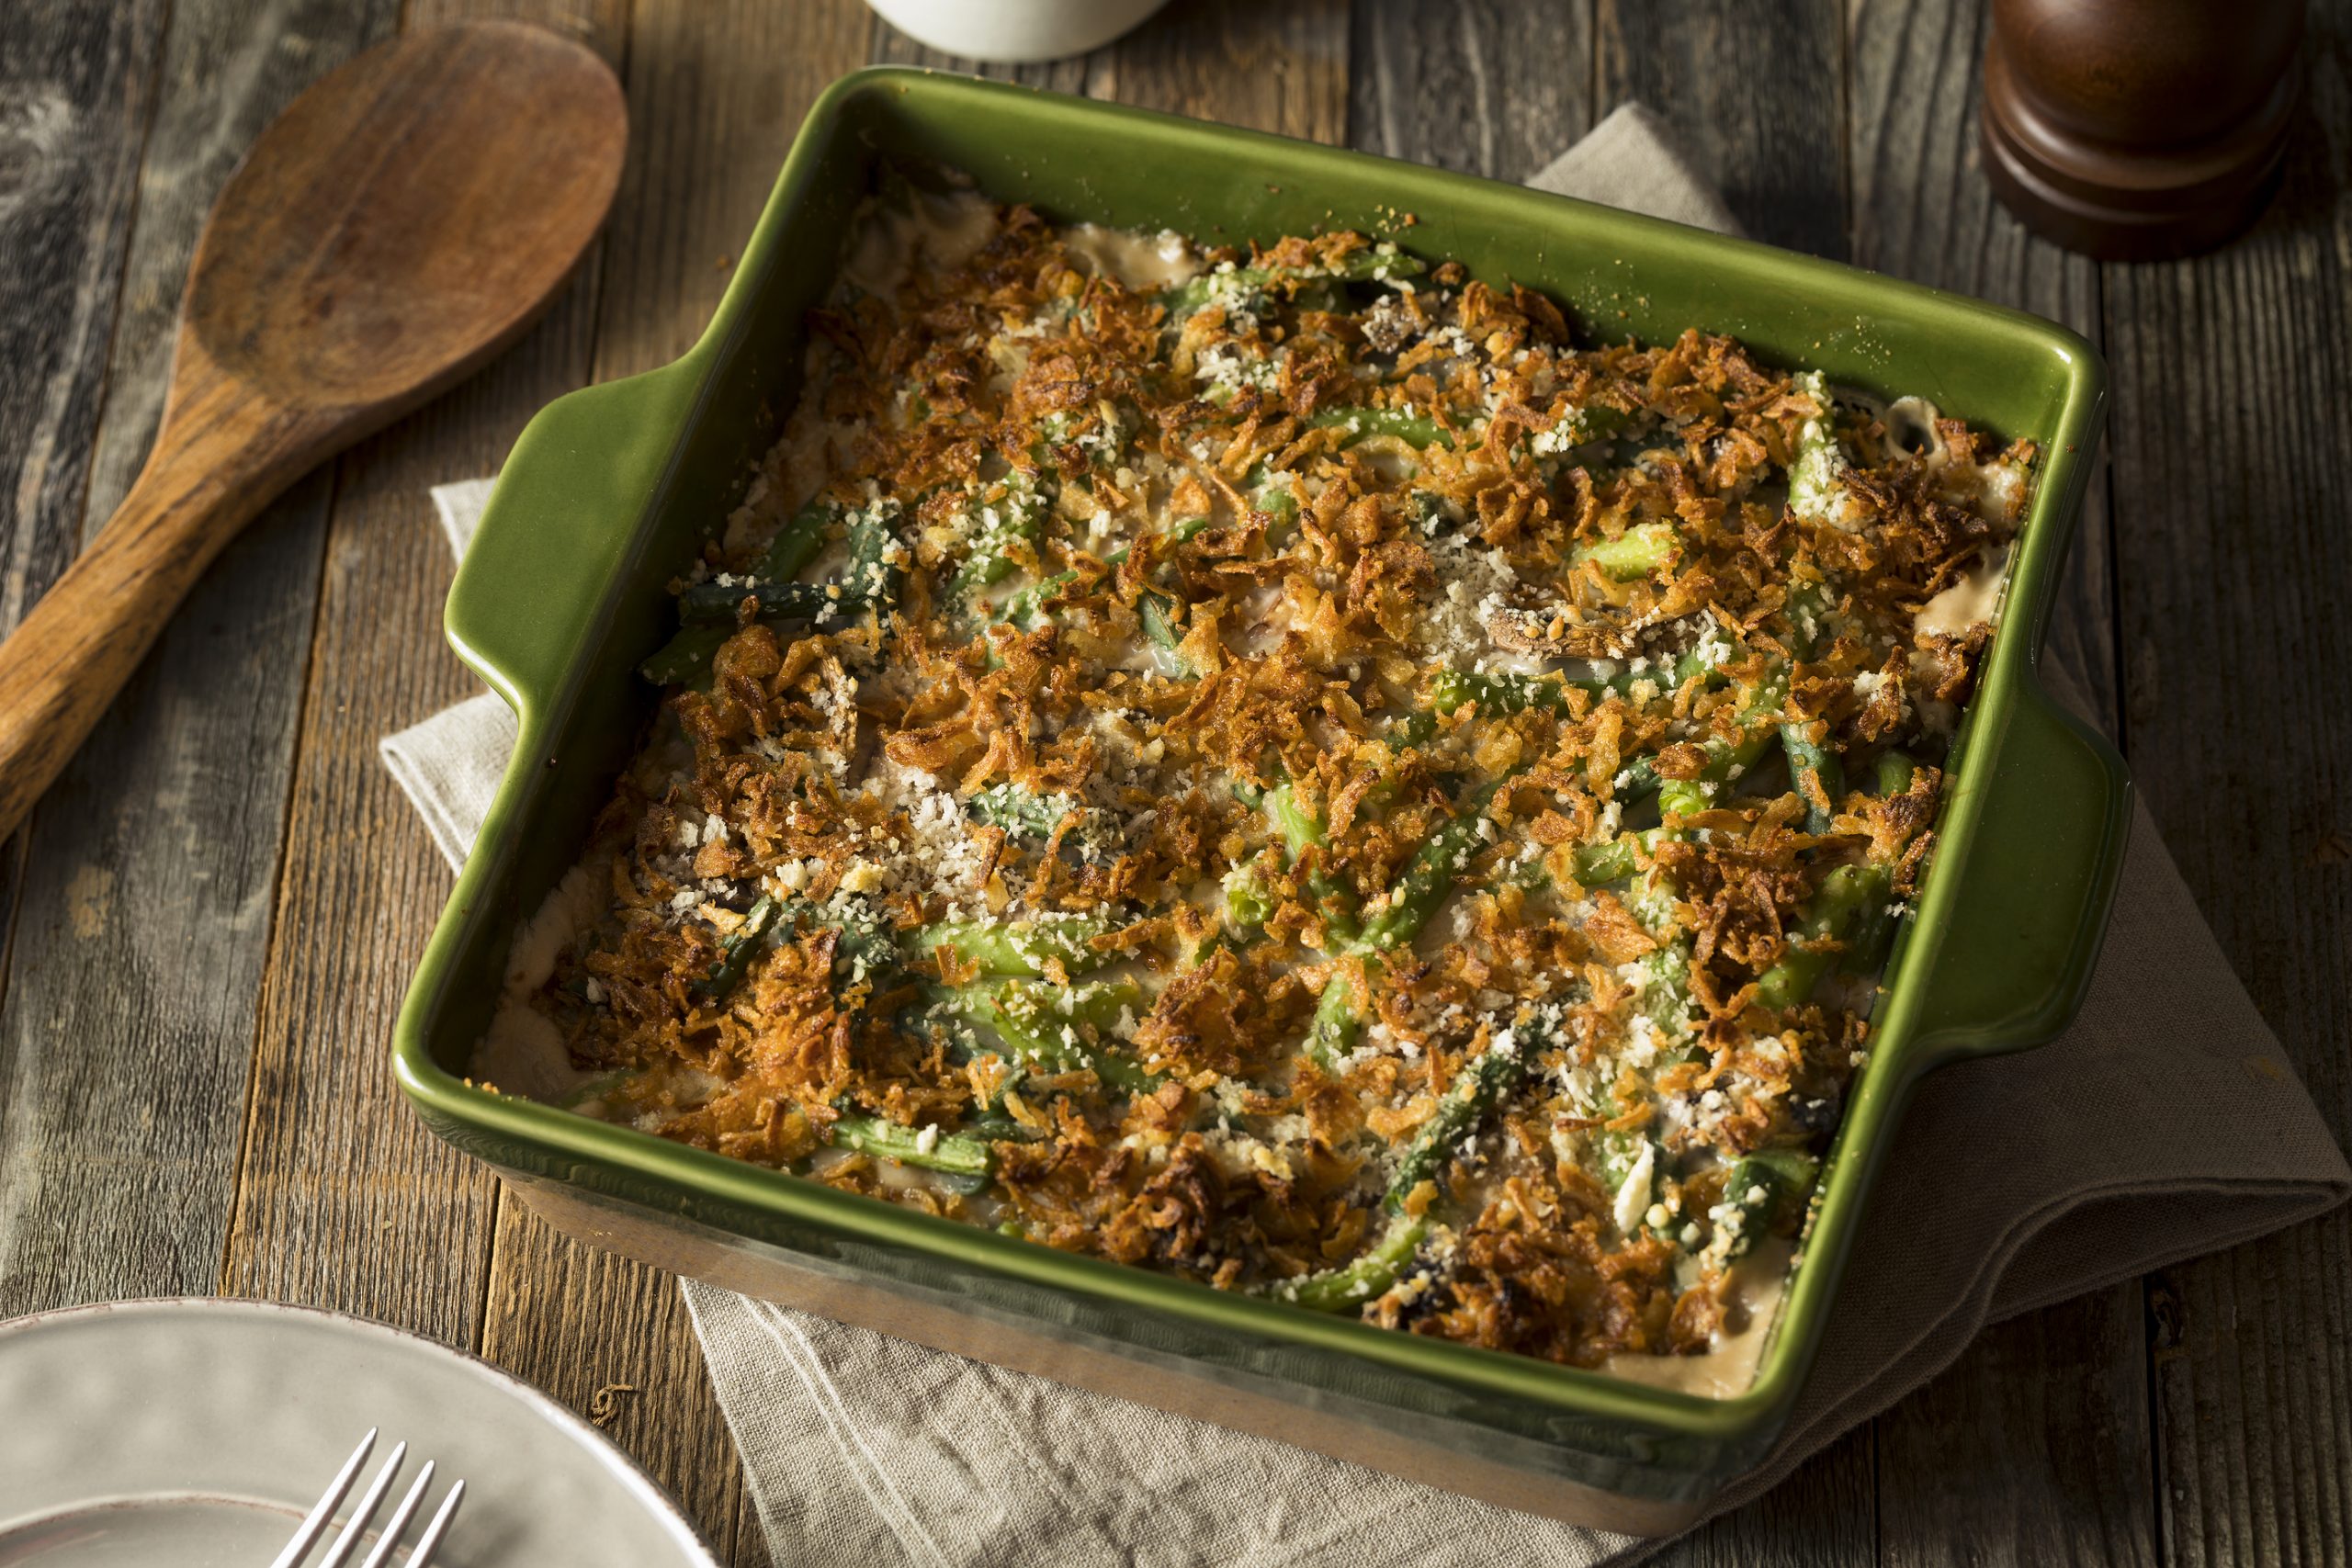 A healthy holiday swap: Green kale and onion casserole recipe